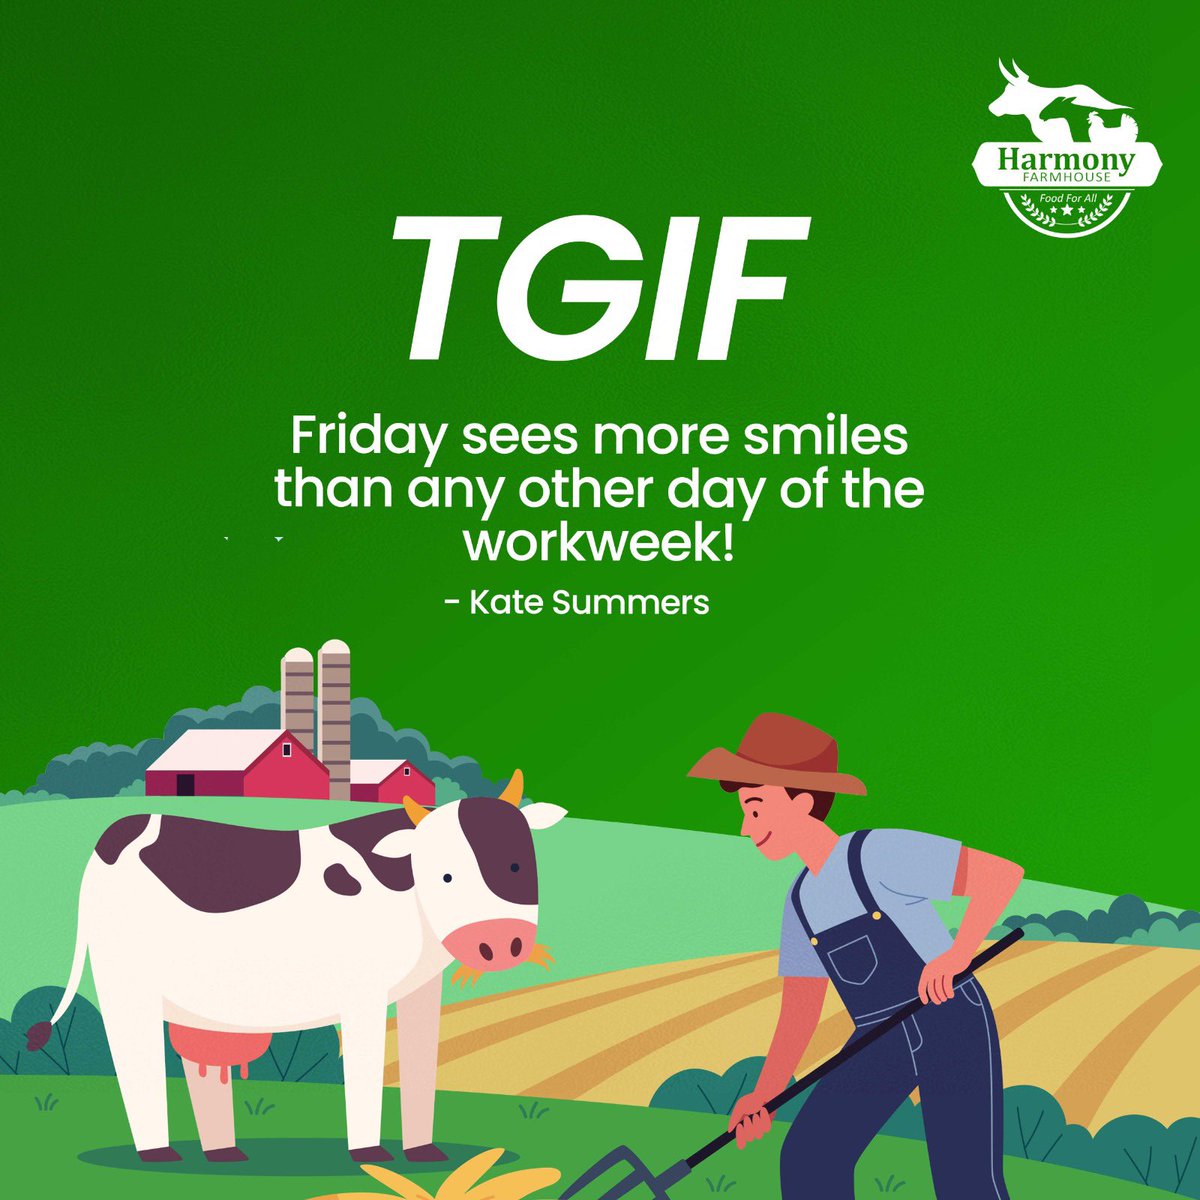 Celebrate the small victories and big weekends. Happy Friday! #harmonygroupng #harmonyfarmhouse #foodforall #farming #livestock #tgif